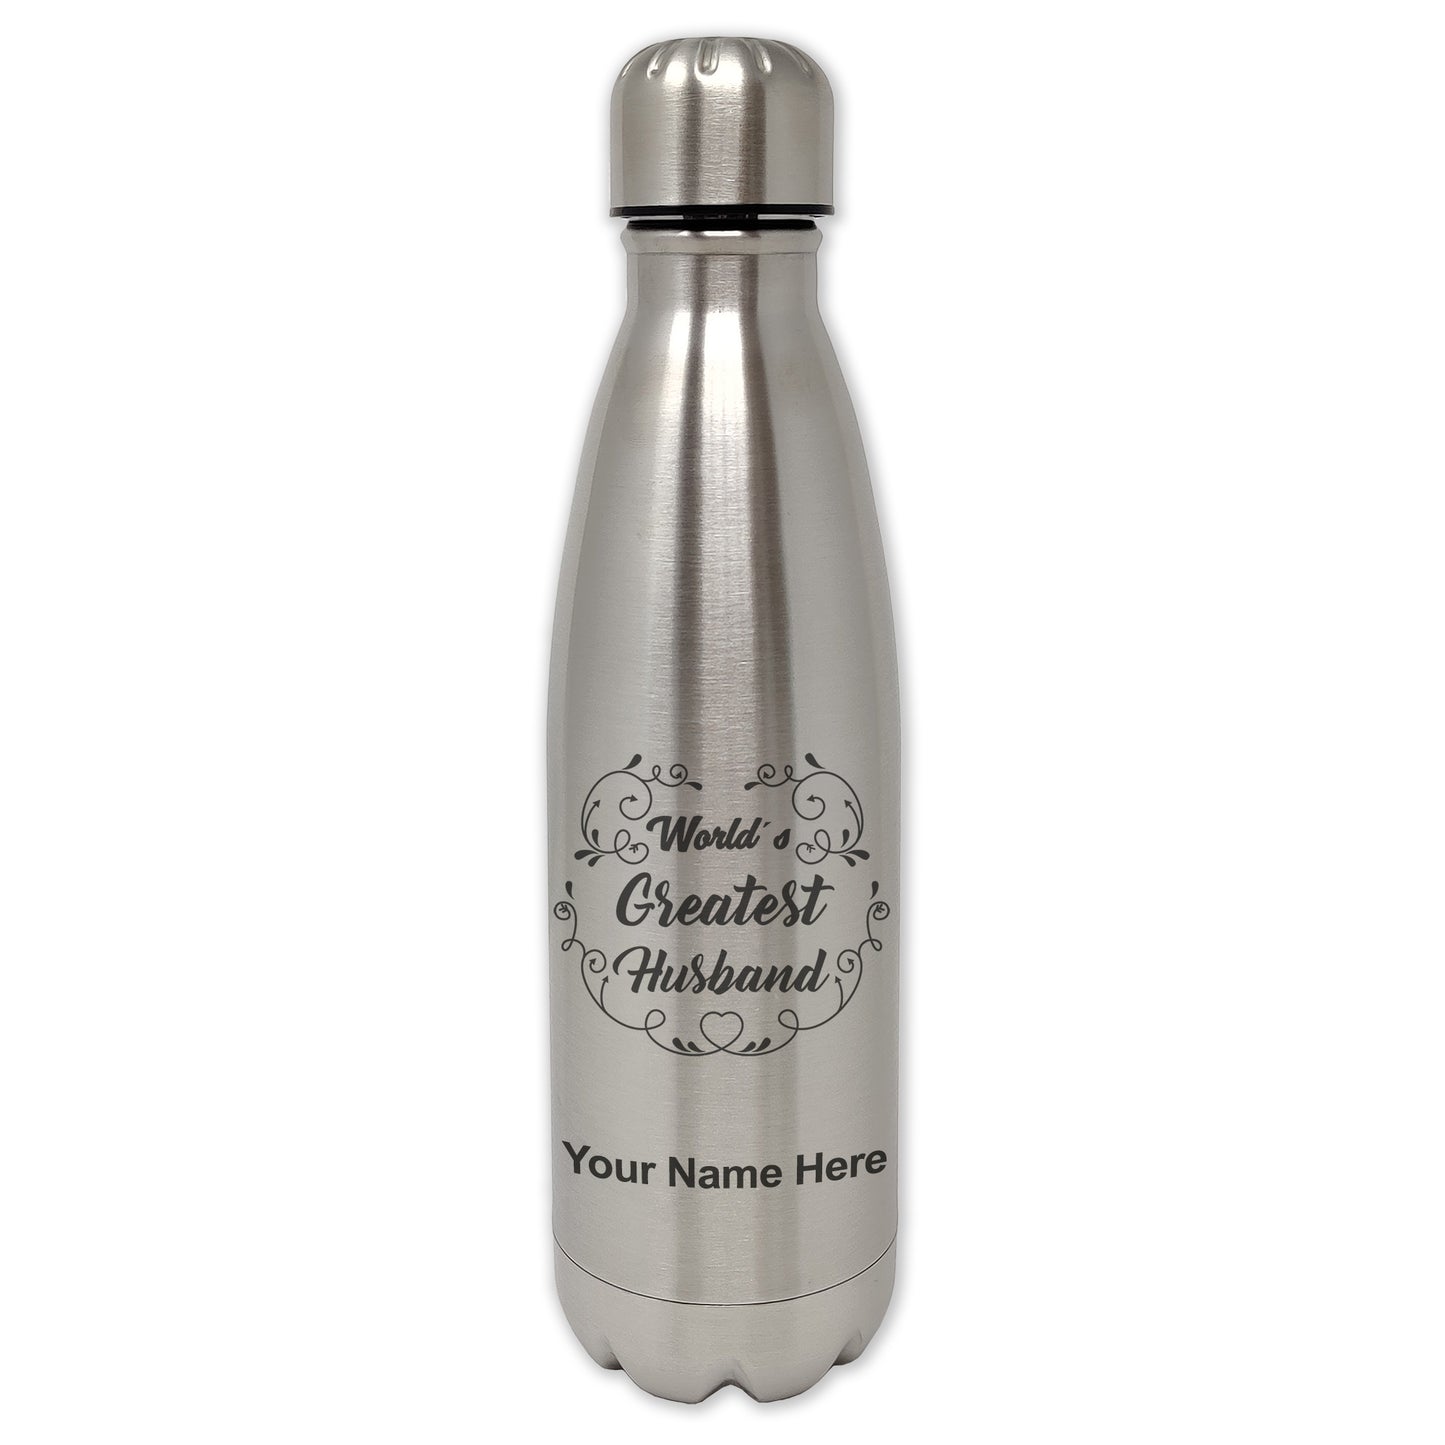 LaserGram Single Wall Water Bottle, World's Greatest Husband, Personalized Engraving Included